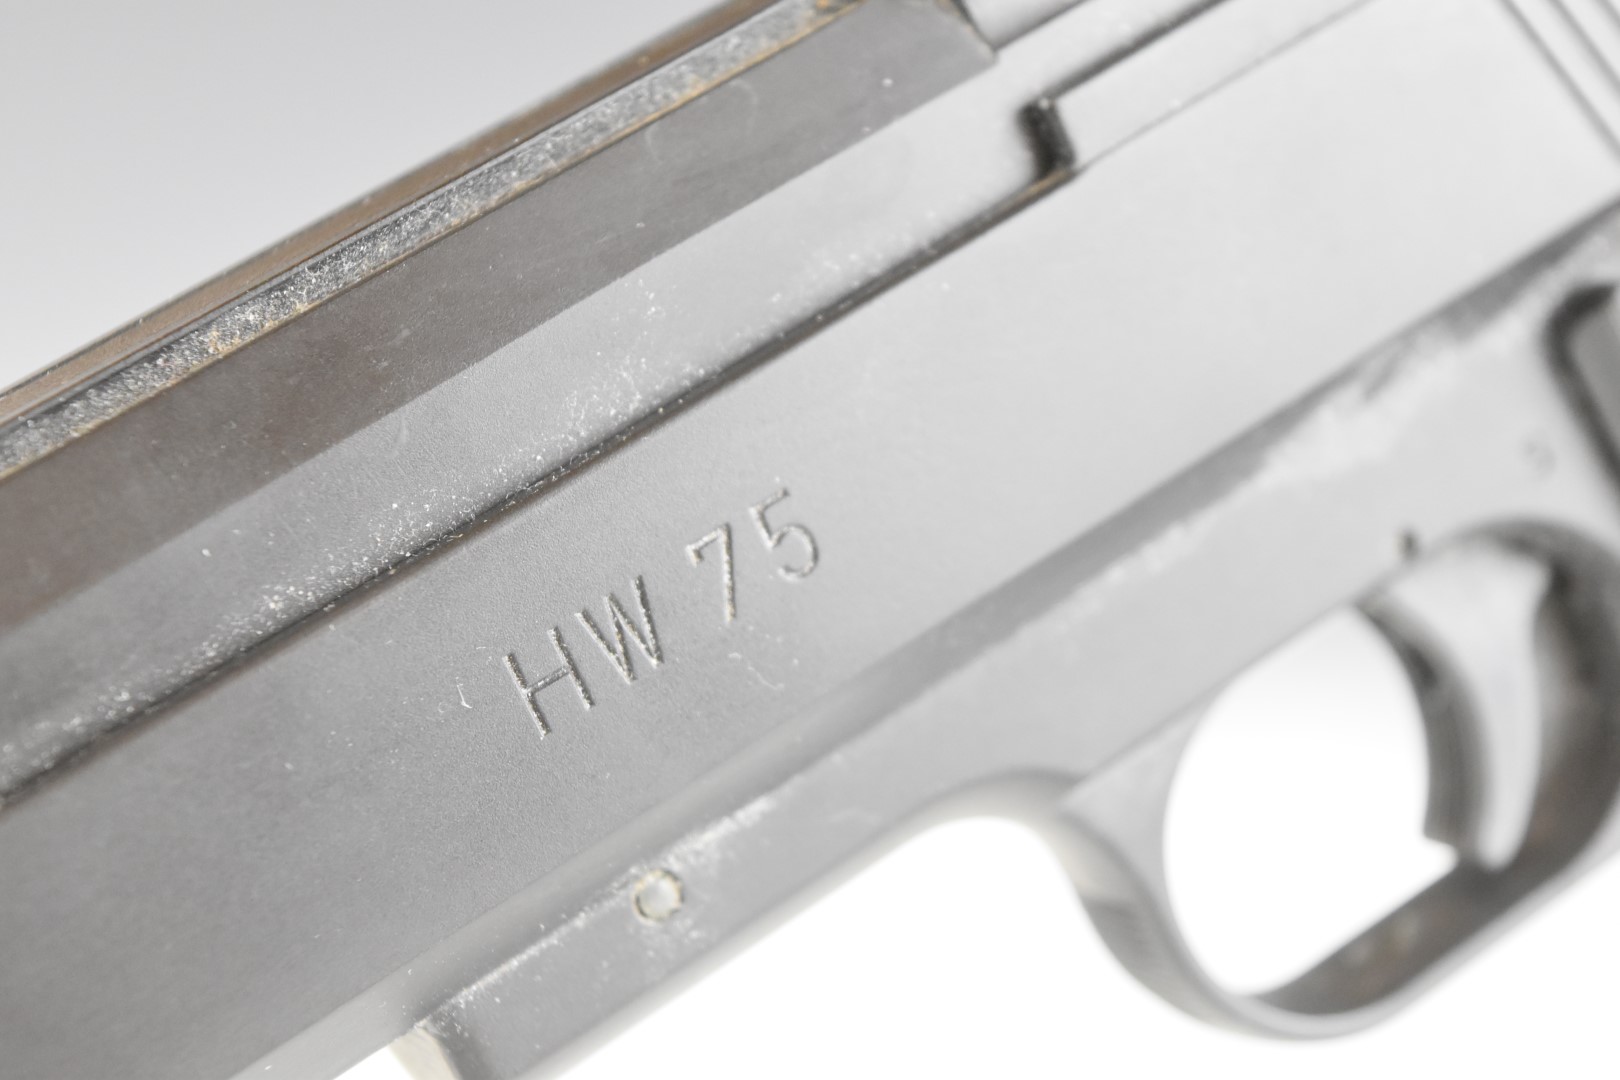 Weihrauch HW75 .177 air pistol with shaped and textured wooden grips and adjustable sights and - Image 9 of 12